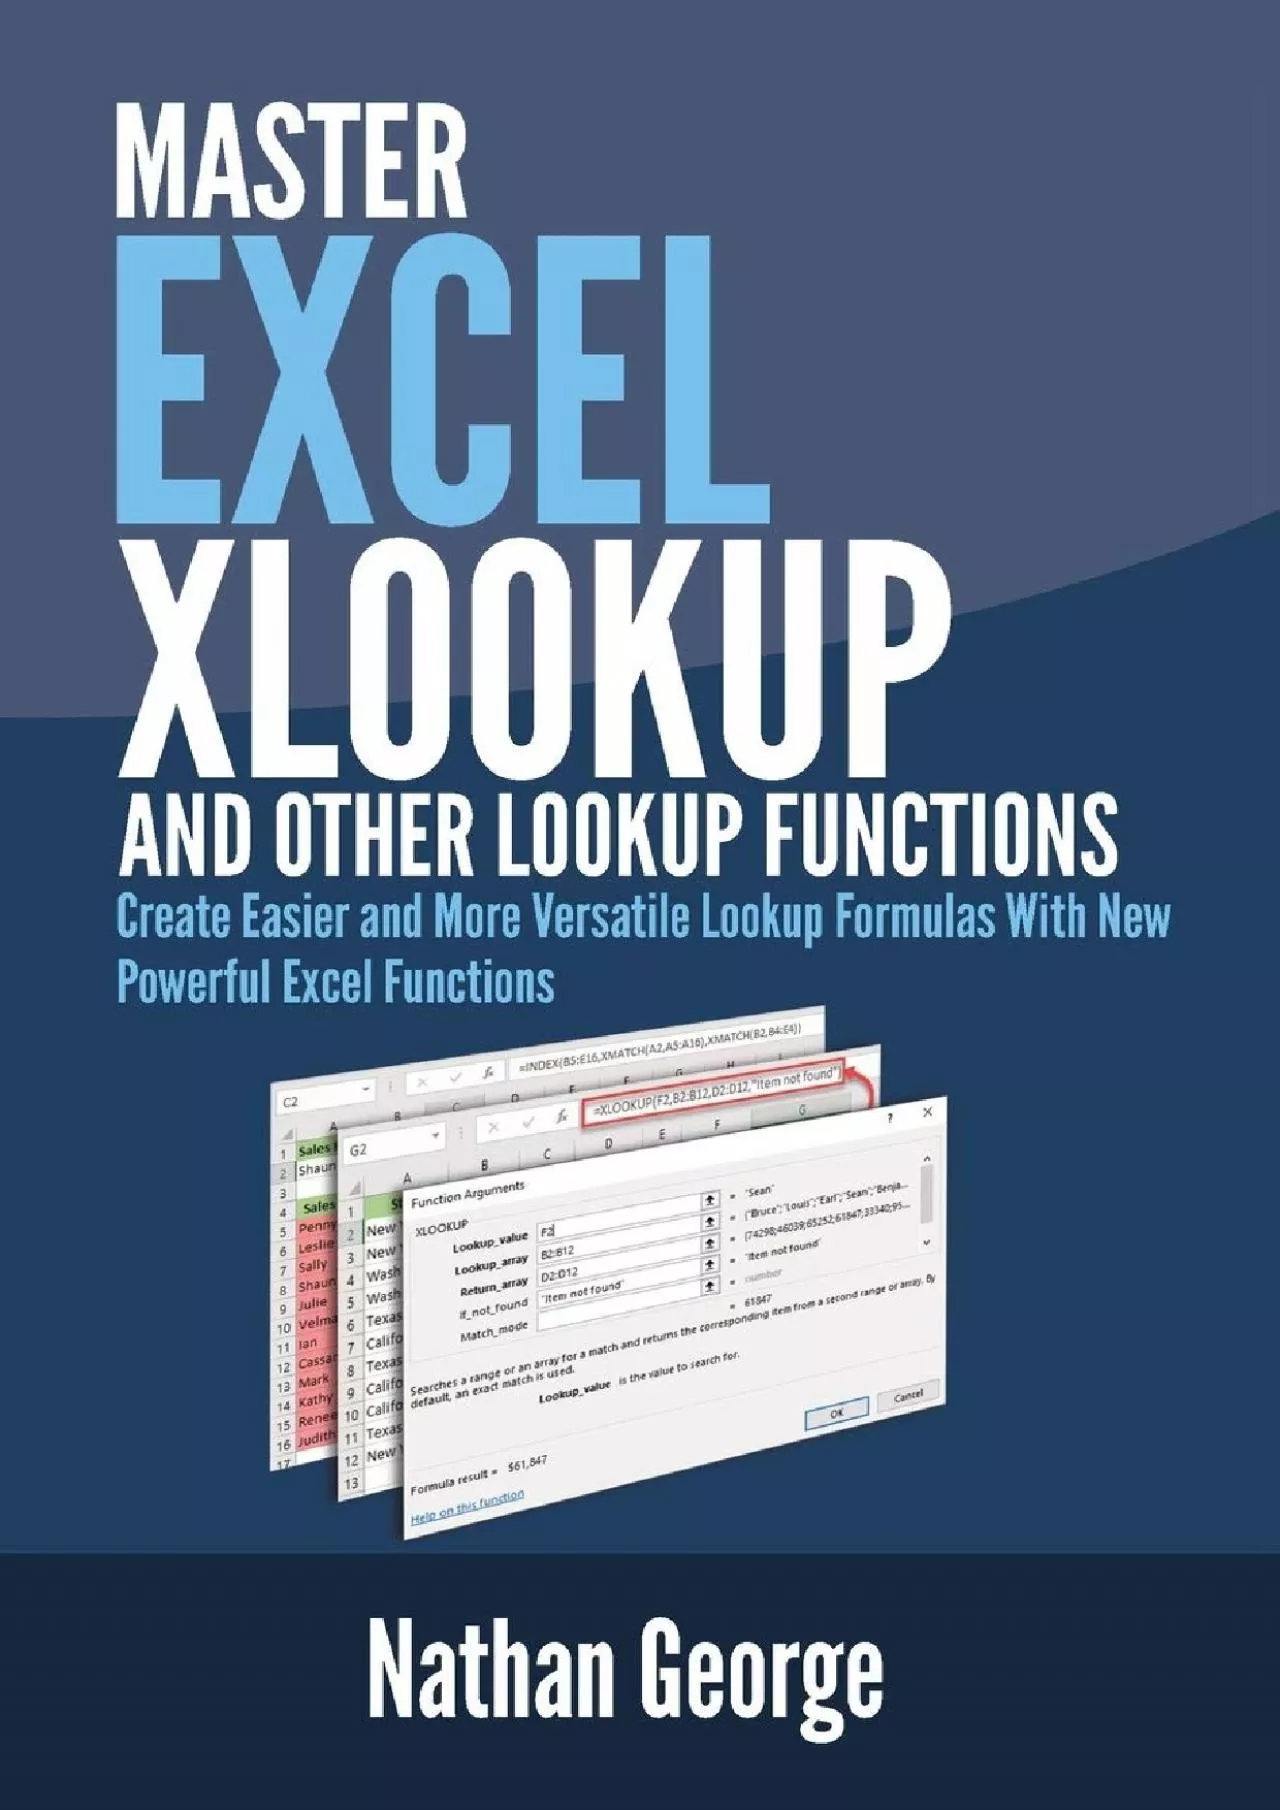 (BOOS)-Excel XLOOKUP and Other Lookup Functions: Create Easier and More Versatile Lookup